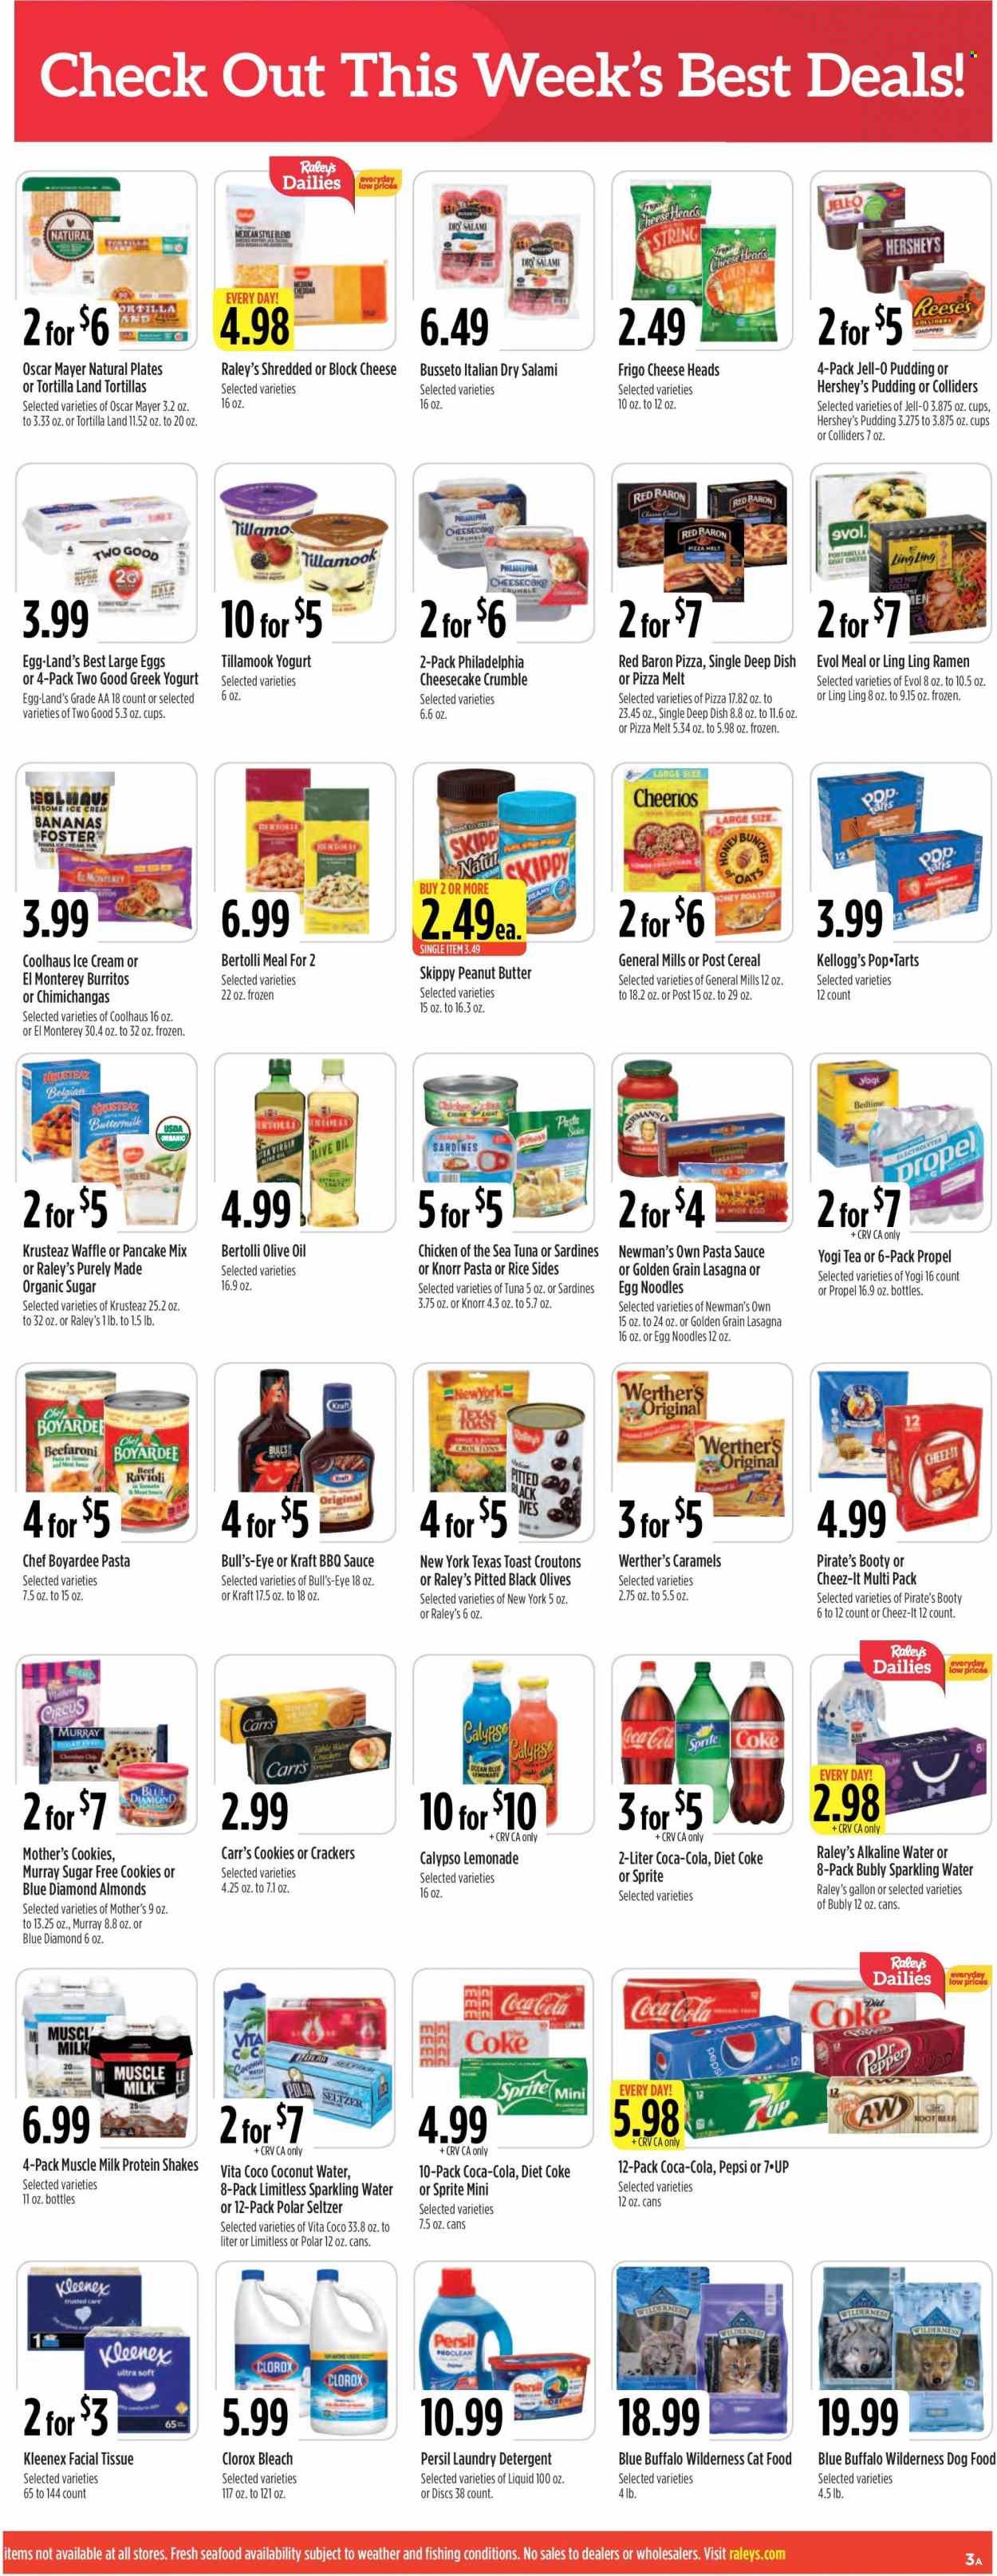 thumbnail - Raley's Flyer - 09/15/2021 - 09/21/2021 - Sales products - tortillas, sardines, ramen, ravioli, pizza, pasta sauce, Knorr, pancakes, burrito, noodles, lasagna meal, Kraft®, Bertolli, salami, Oscar Mayer, Philadelphia, greek yoghurt, pudding, yoghurt, buttermilk, protein drink, shake, muscle milk, large eggs, ice cream, Reese's, Hershey's, Red Baron, cookies, crackers, Kellogg's, Pop-Tarts, Cheez-It, croutons, oats, Jell-O, olives, Chicken of the Sea, Chef Boyardee, cereals, Cheerios, rice, egg noodles, pepper, BBQ sauce, miso, olive oil, oil, peanut butter, almonds, Blue Diamond, Coca-Cola, lemonade, Sprite, Pepsi, Diet Coke, coconut water, 7UP, seltzer water, sparkling water, alkaline water, tea, beer, Kleenex, tissues, detergent, bleach, Clorox, Persil, laundry detergent, bunches. Page 3.